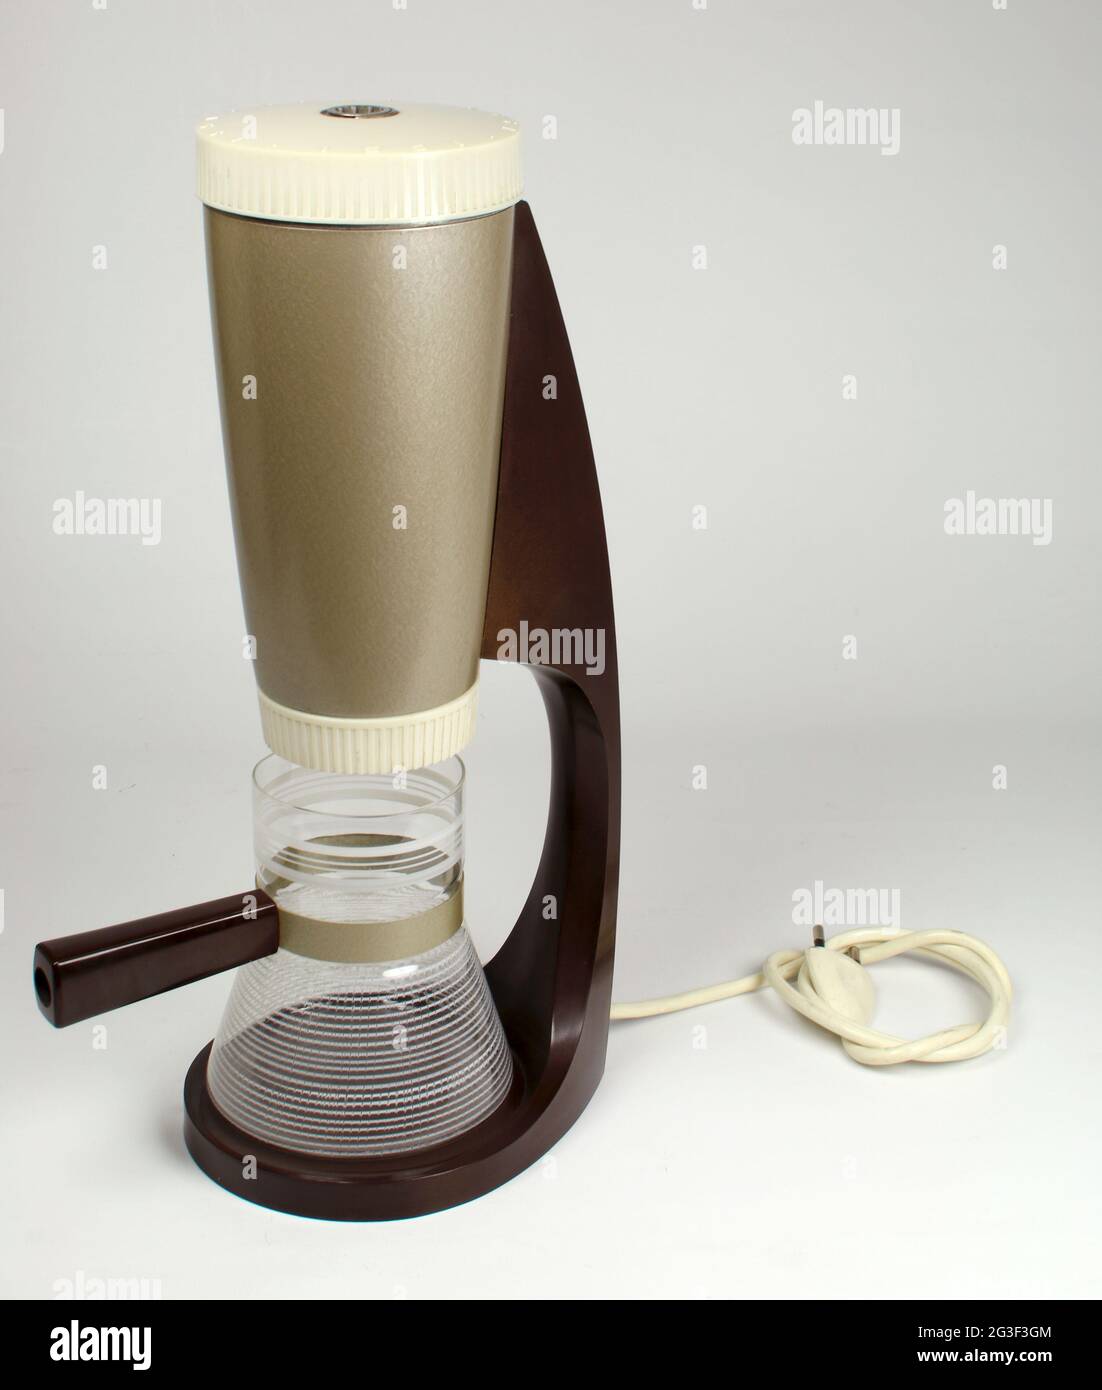 https://c8.alamy.com/comp/2G3F3GM/household-household-appliance-electrical-coffee-maker-issi-additional-rights-clearance-info-not-available-2G3F3GM.jpg